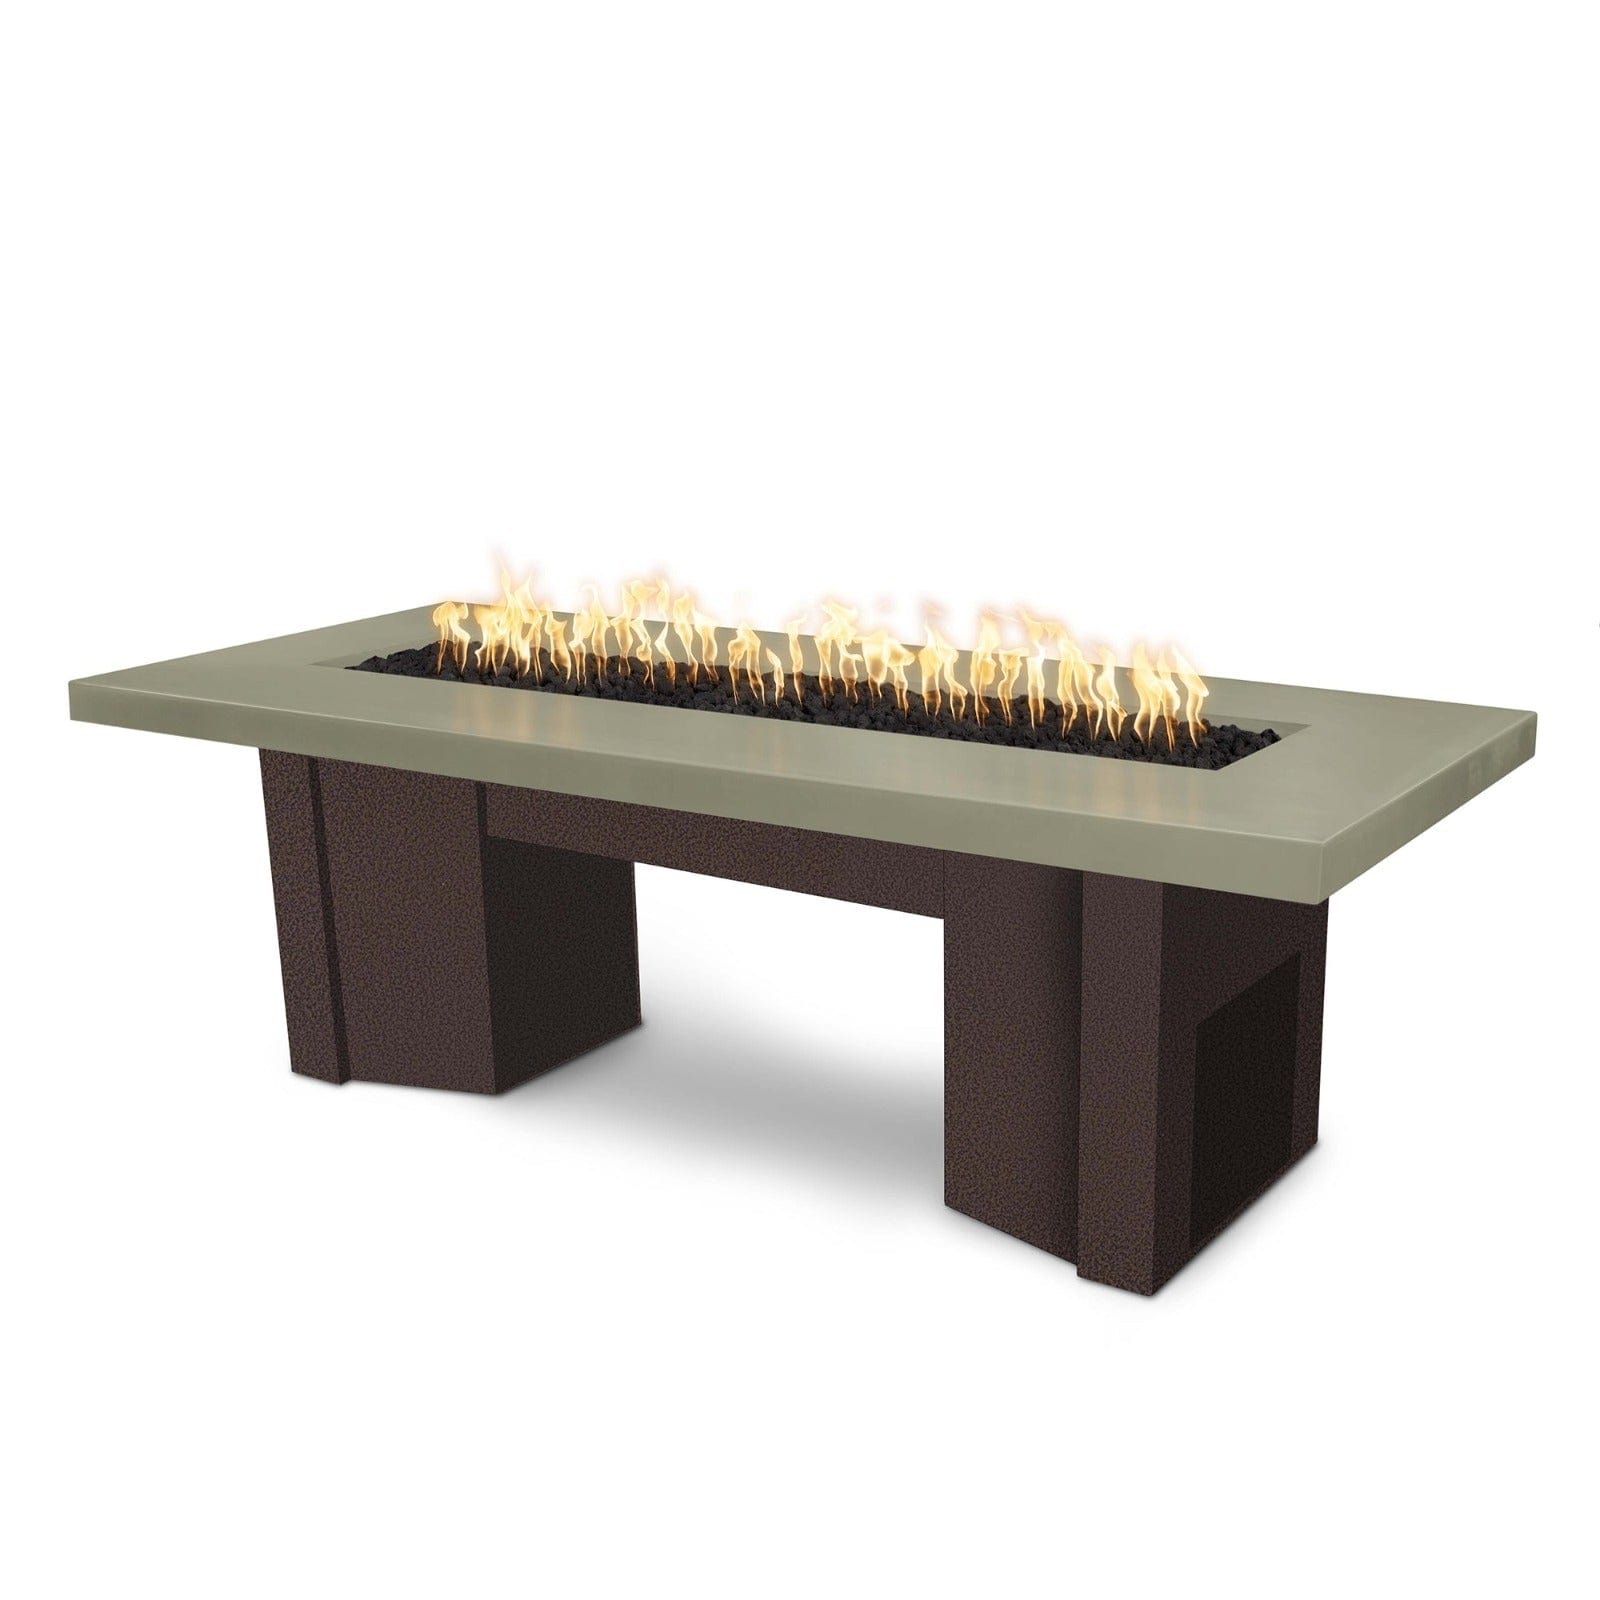 The Outdoor Plus Fire Features Ash (-ASH) / Copper Vein Powder Coated Steel (-CPV) The Outdoor Plus 60" Alameda Fire Table Smooth Concrete in Liquid Propane - Match Lit with Flame Sense System / OPT-ALMGFRC60FSML-LP